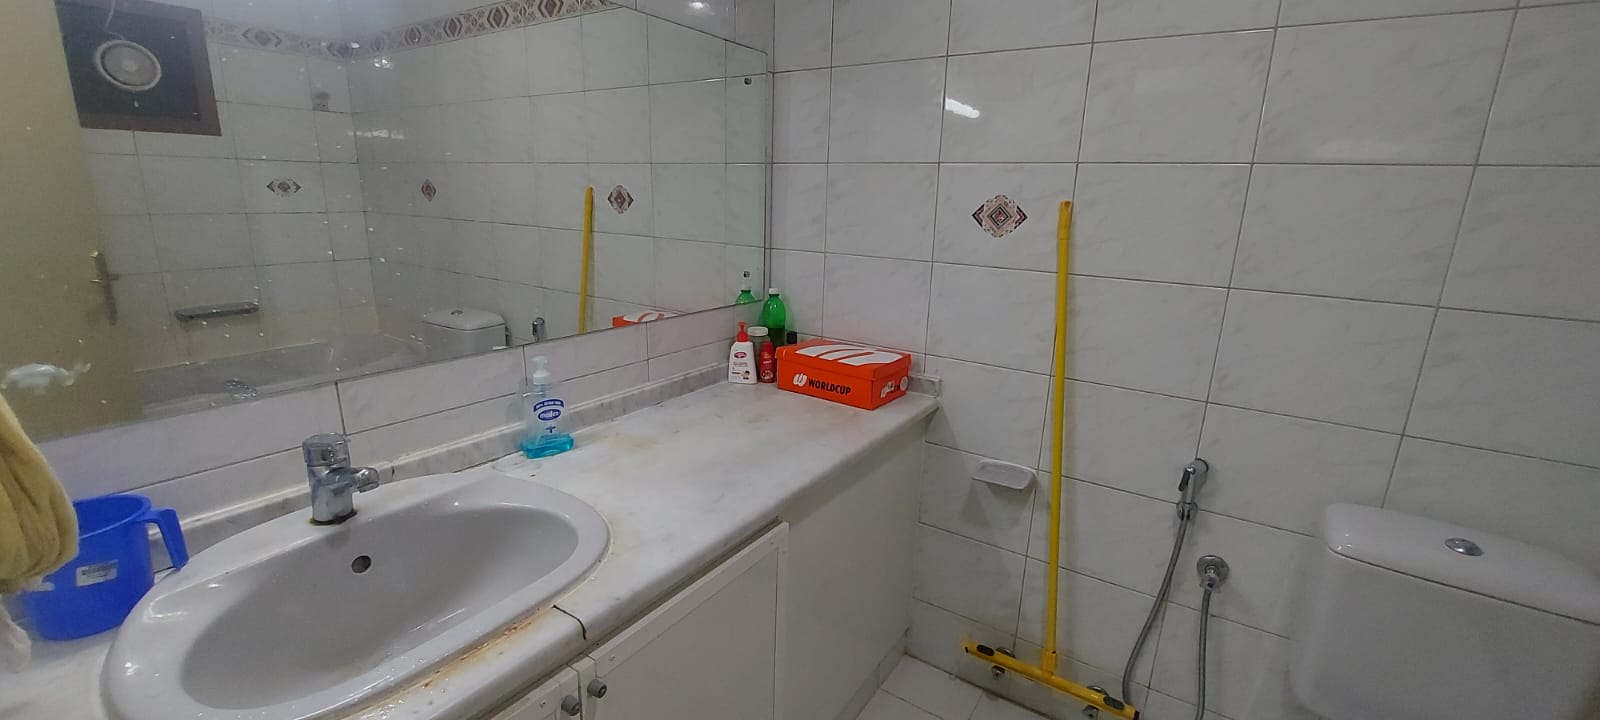 Karama Prime Location 2 Person Room Single Bed Space Available